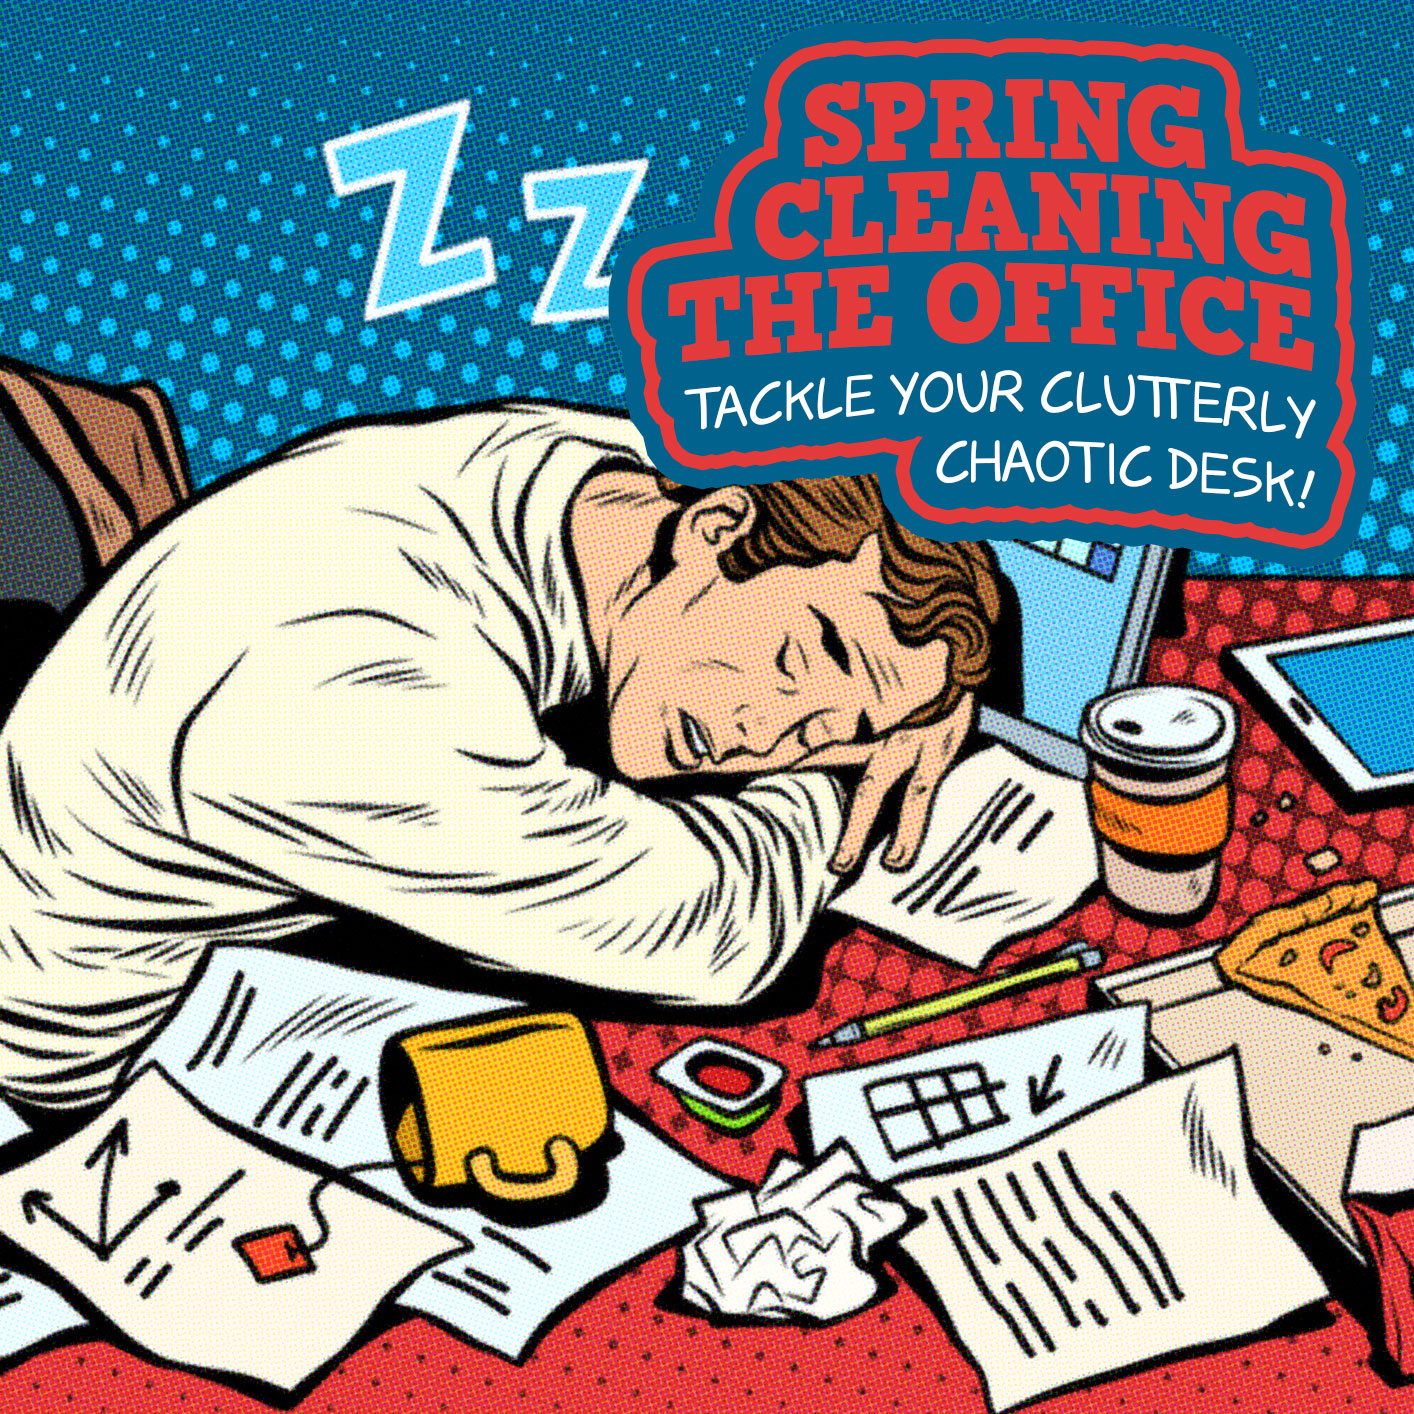 Spring Cleaning The Office Edition: Tackle Your Clutterly Chaotic Desk!